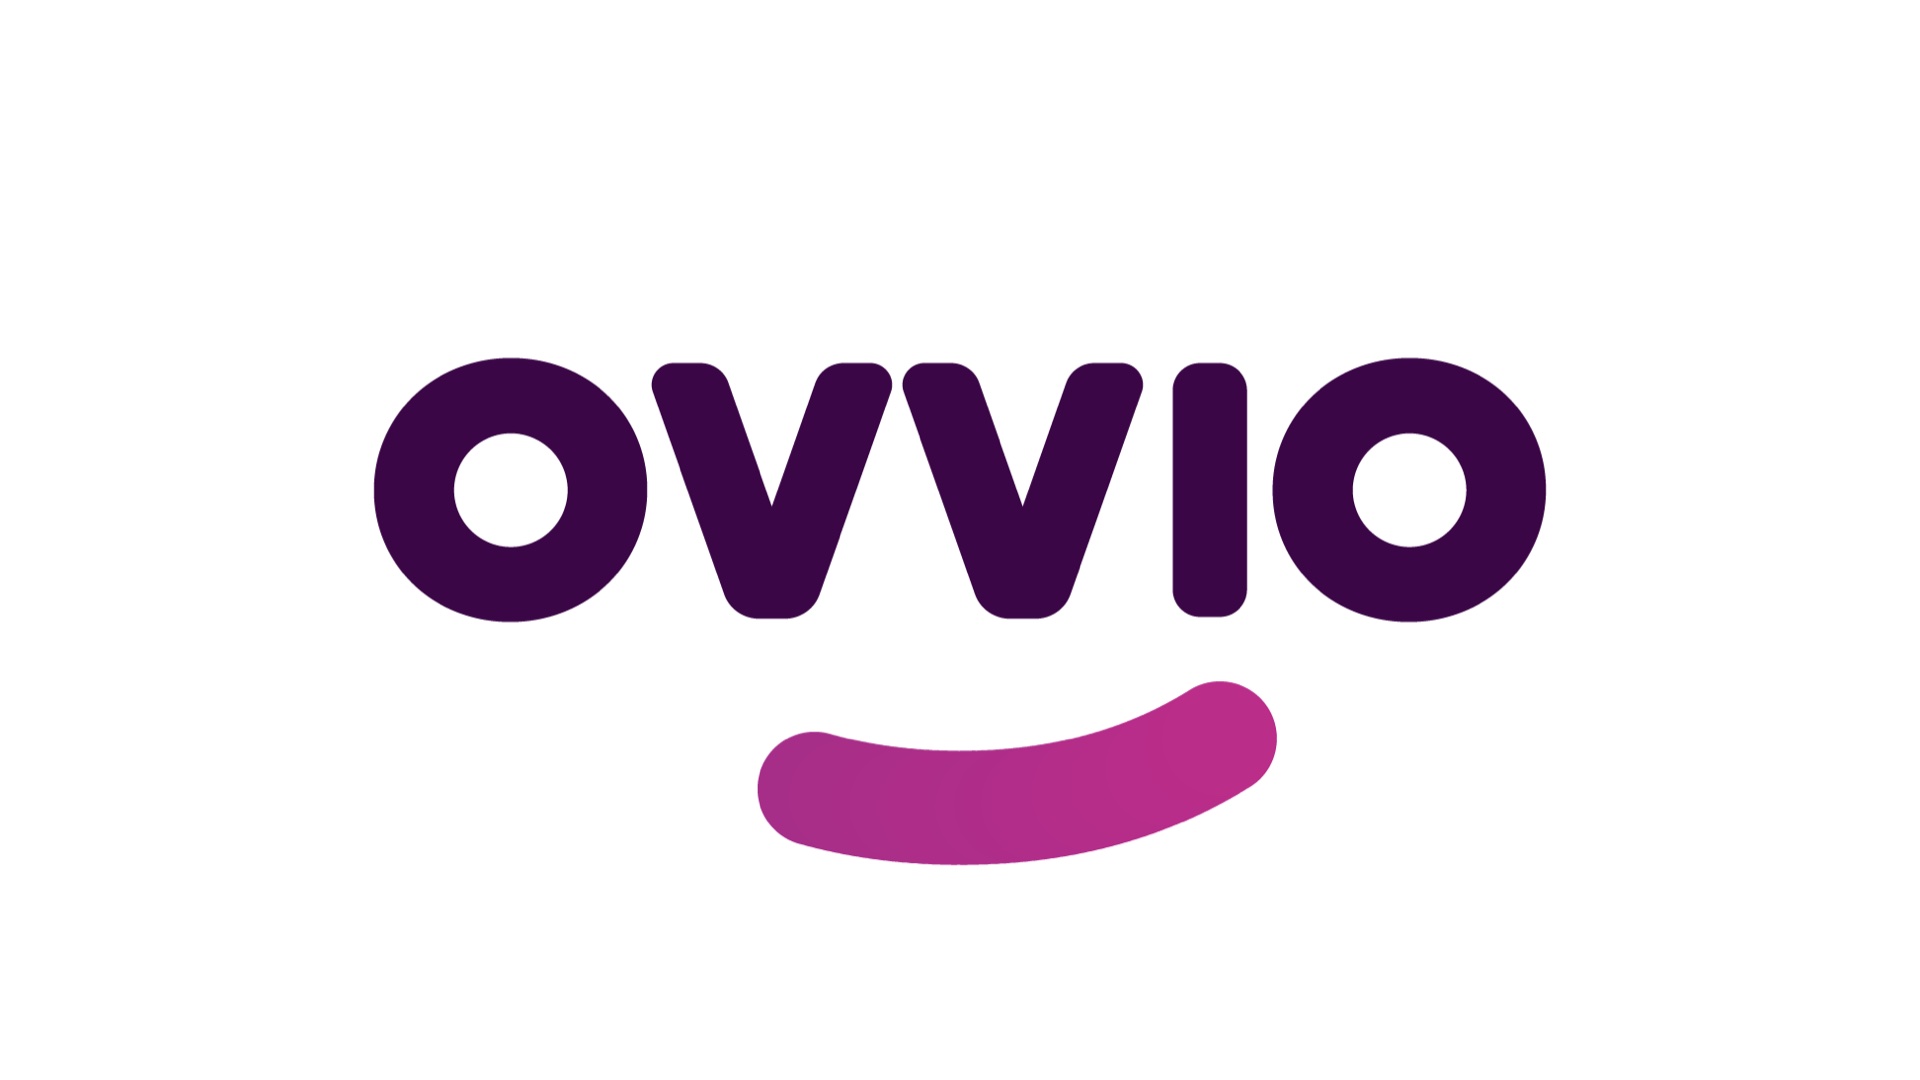 Ovvio brings the focus back to humans from AI